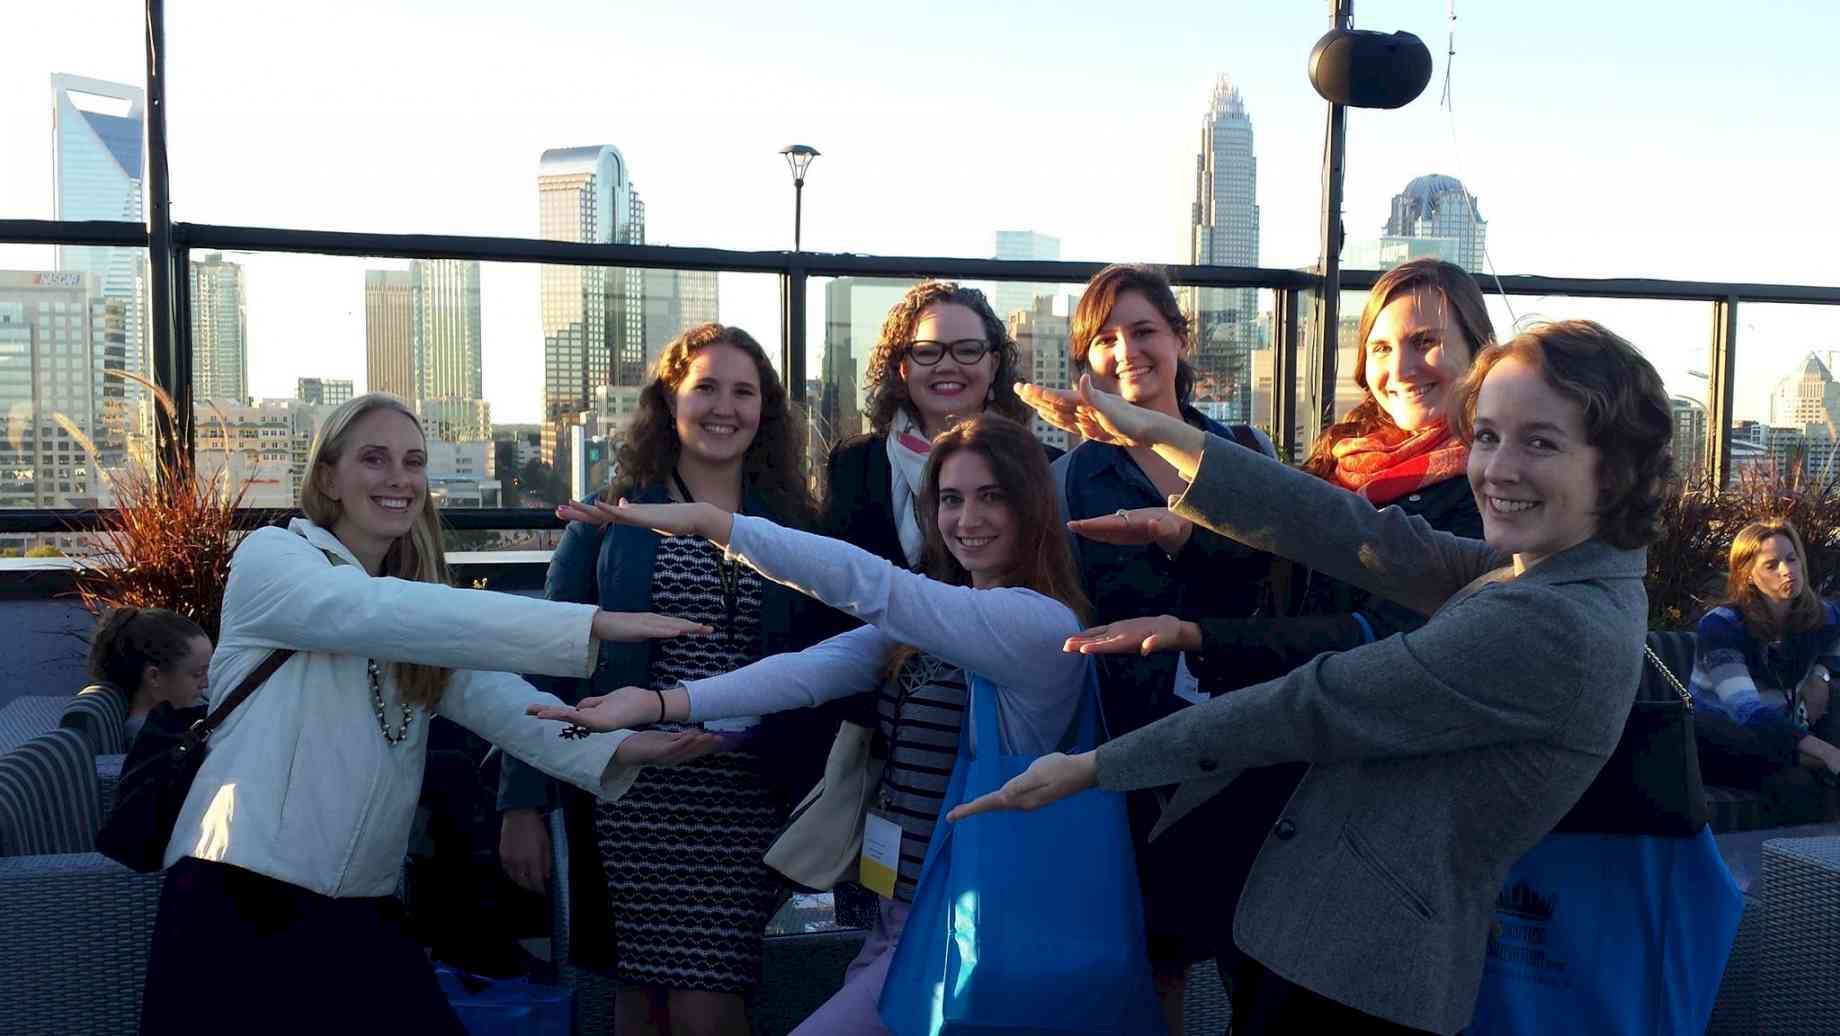 Former Museum Studies faculty Briley Rasmussen ‘gator chomps’ with Museum Studies students. [Alt text: A group of seven women in front of a city skyline, their arms raised to mimic alligators with open mouths.]